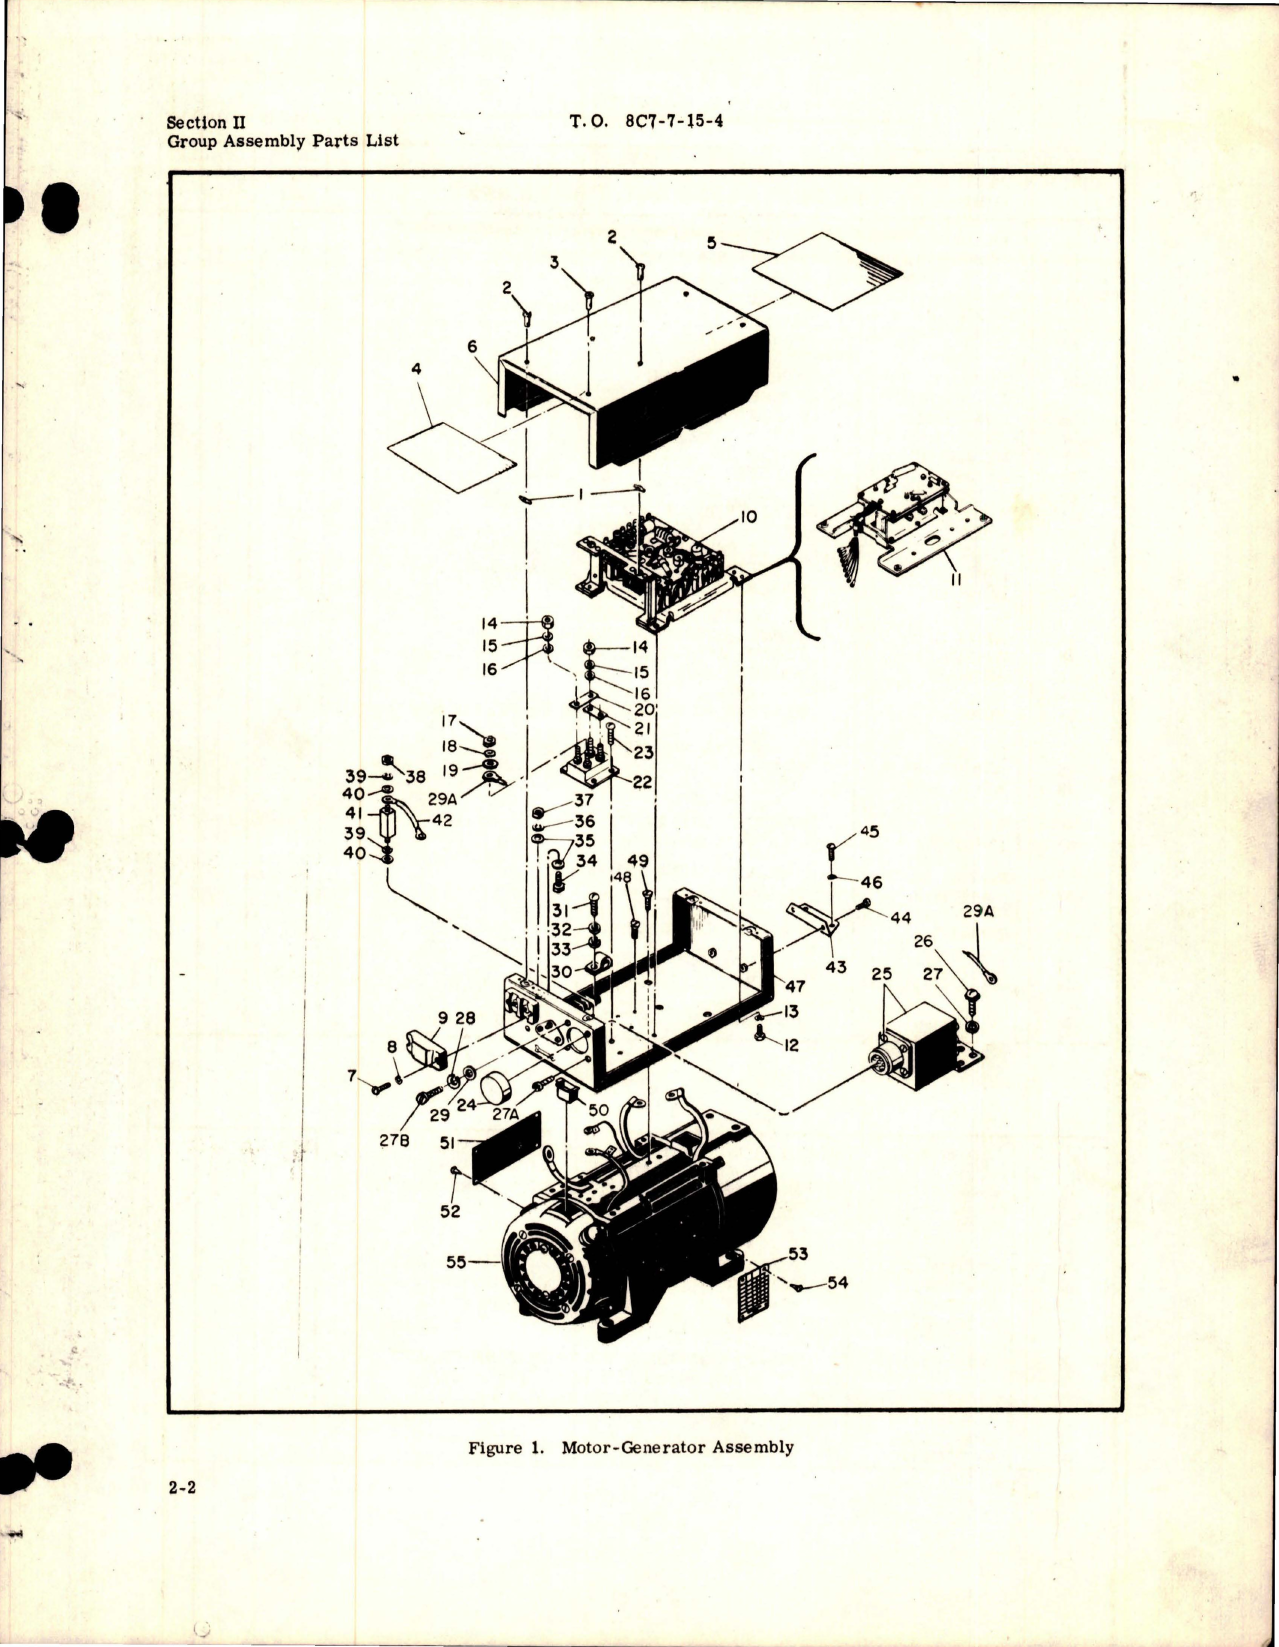 Sample page 9 from AirCorps Library document: Illustrated Parts Breakdown for Motor Generator Assdembly - Part MGE23-400 - FSN 6125-020-3217